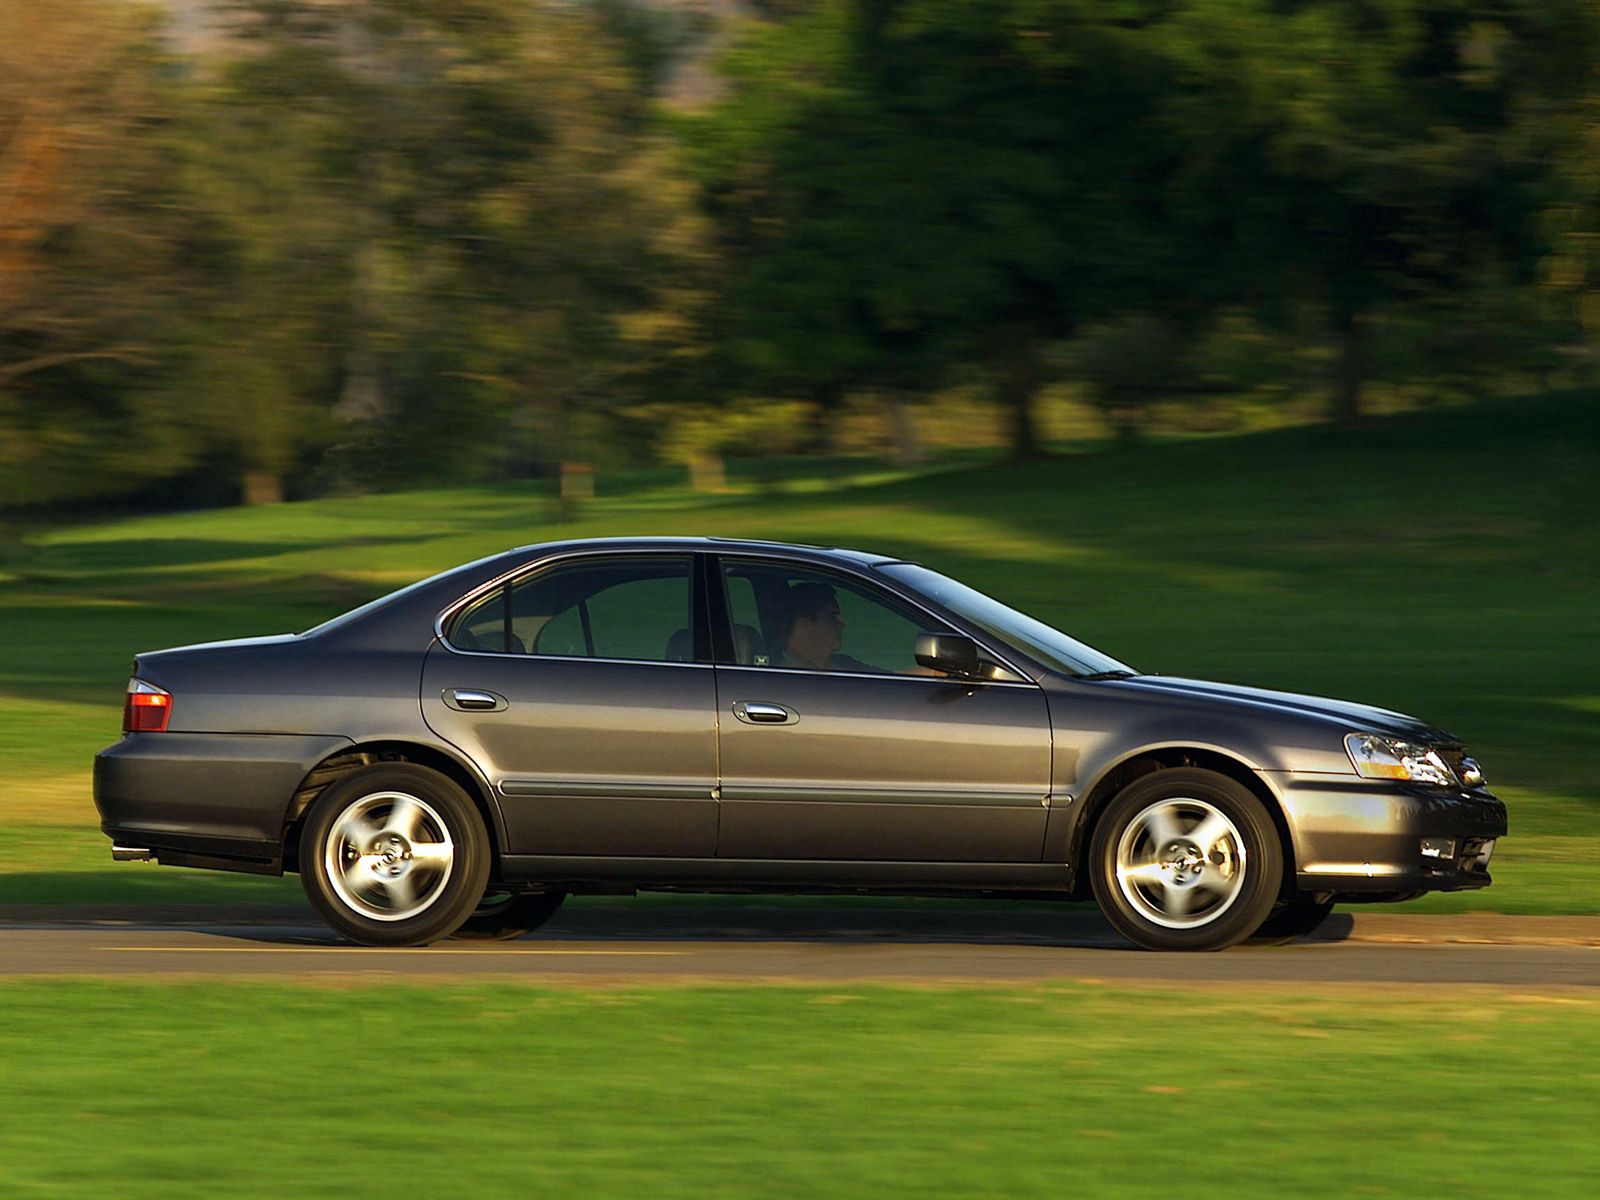 auto, nature, trees, grass, acura, cars, blue, side view, speed, style, akura, tl, 2002 High Definition image